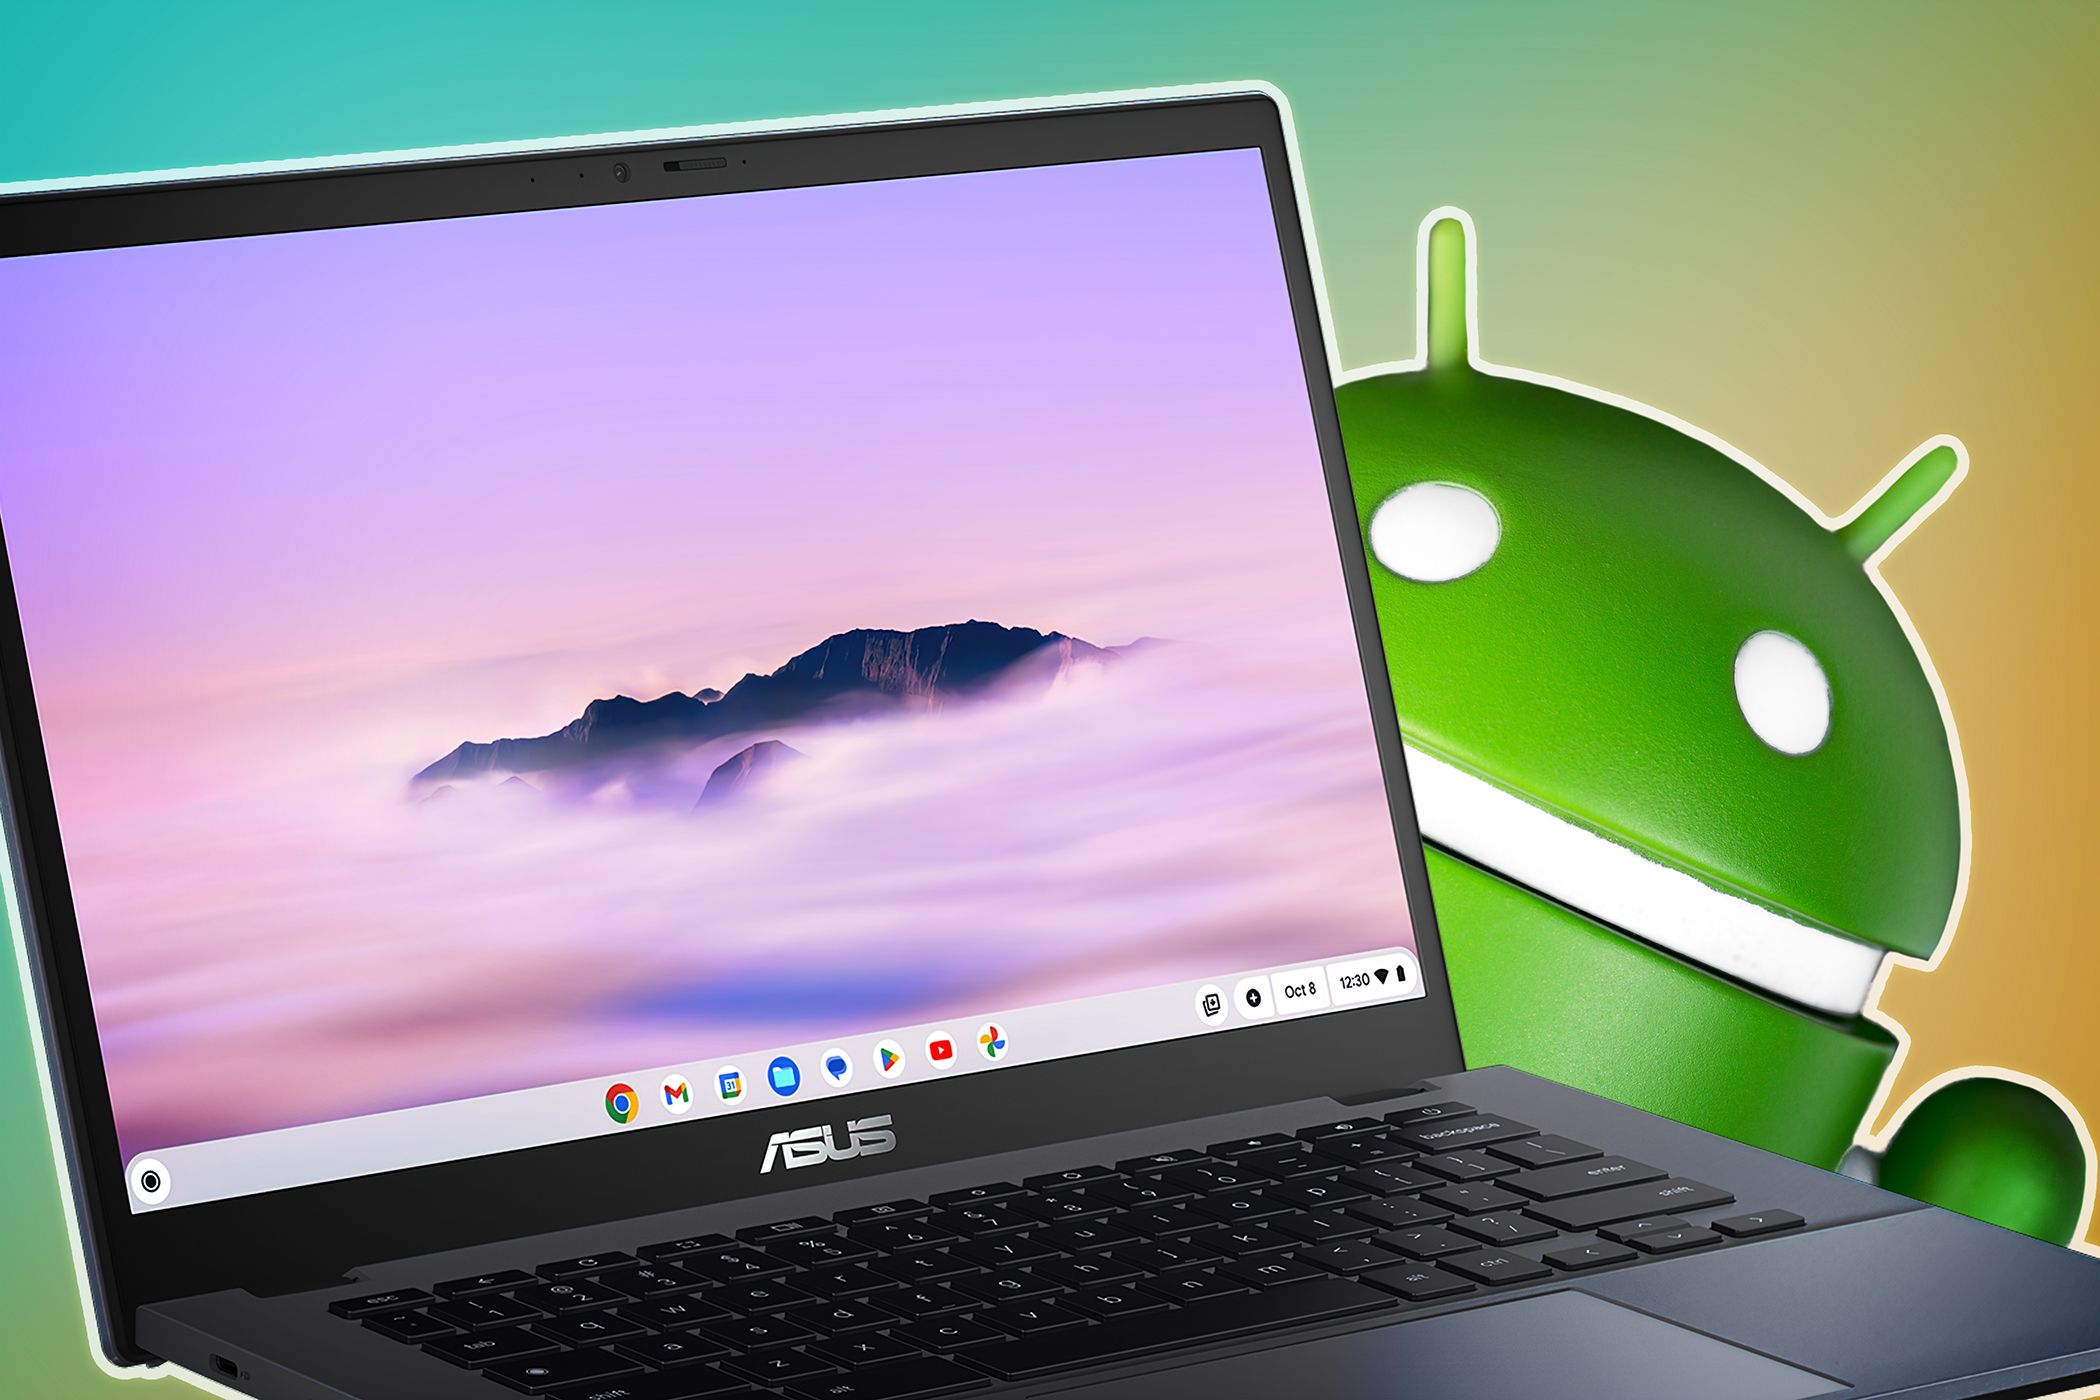 ASUS Chromebook laptop with a scenic wallpaper, accompanied by an Android logo, indicating Android compatibility or integration.